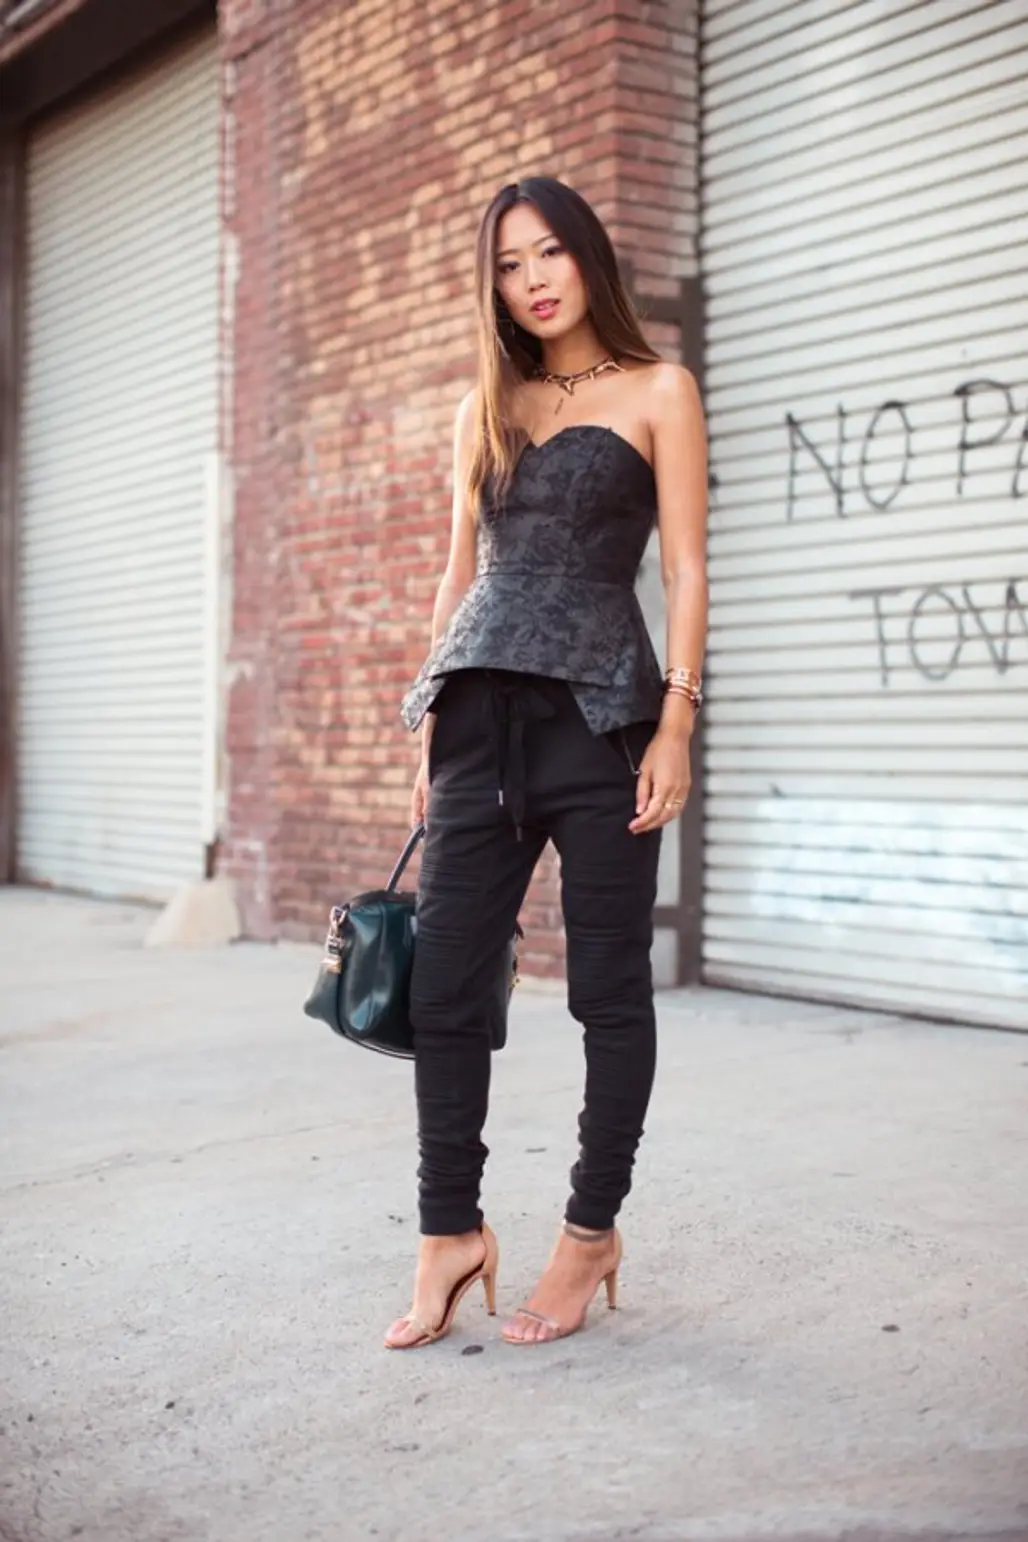 Try Track Pants with a Bustier